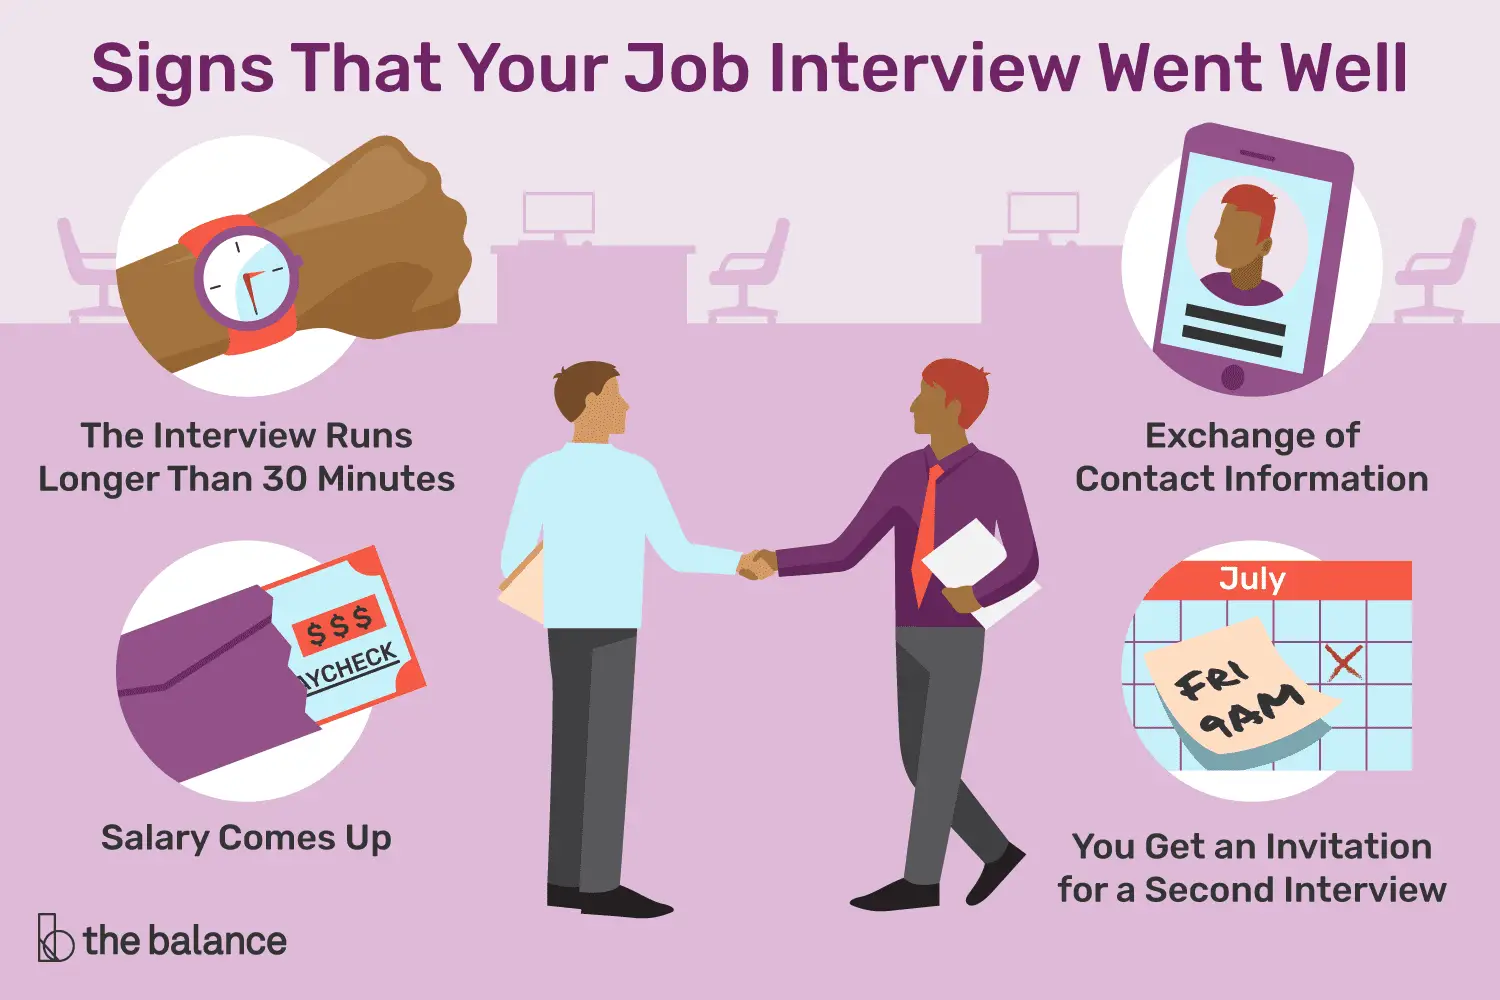 Signs That Your Job Interview Went Well